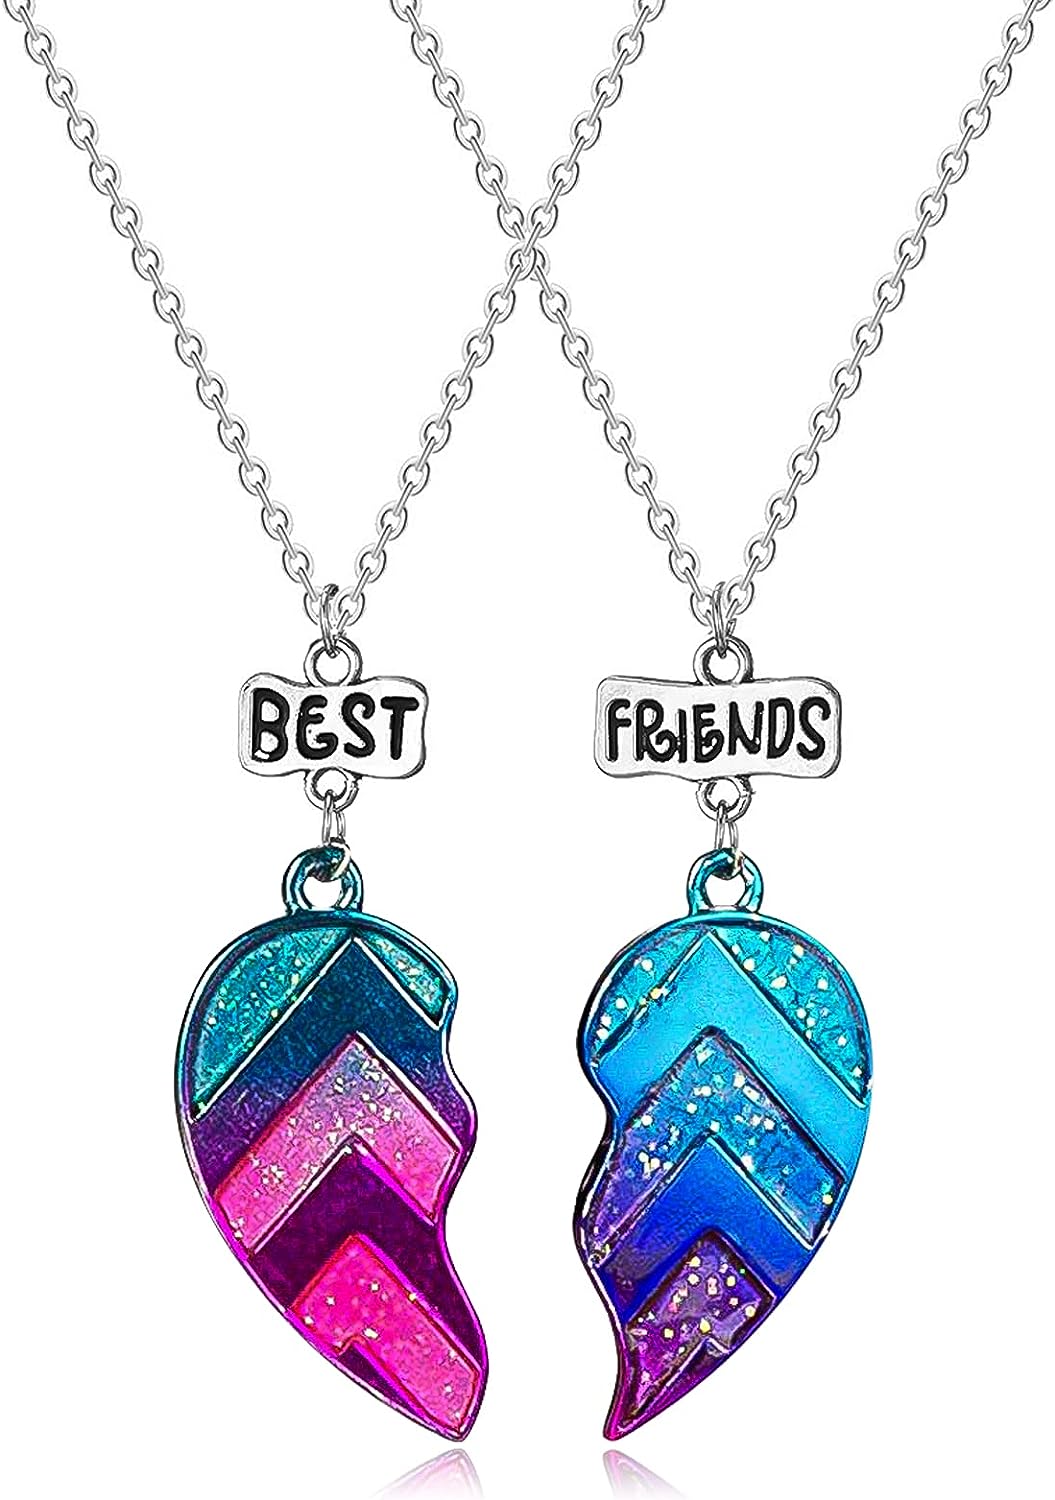 ZYHO Airlove BFF Friendship Necklace for 2 - Best Friend Necklaces BFF  Gifts for 2 Matching Heart Best Friends Forever Pendant Necklaces Set